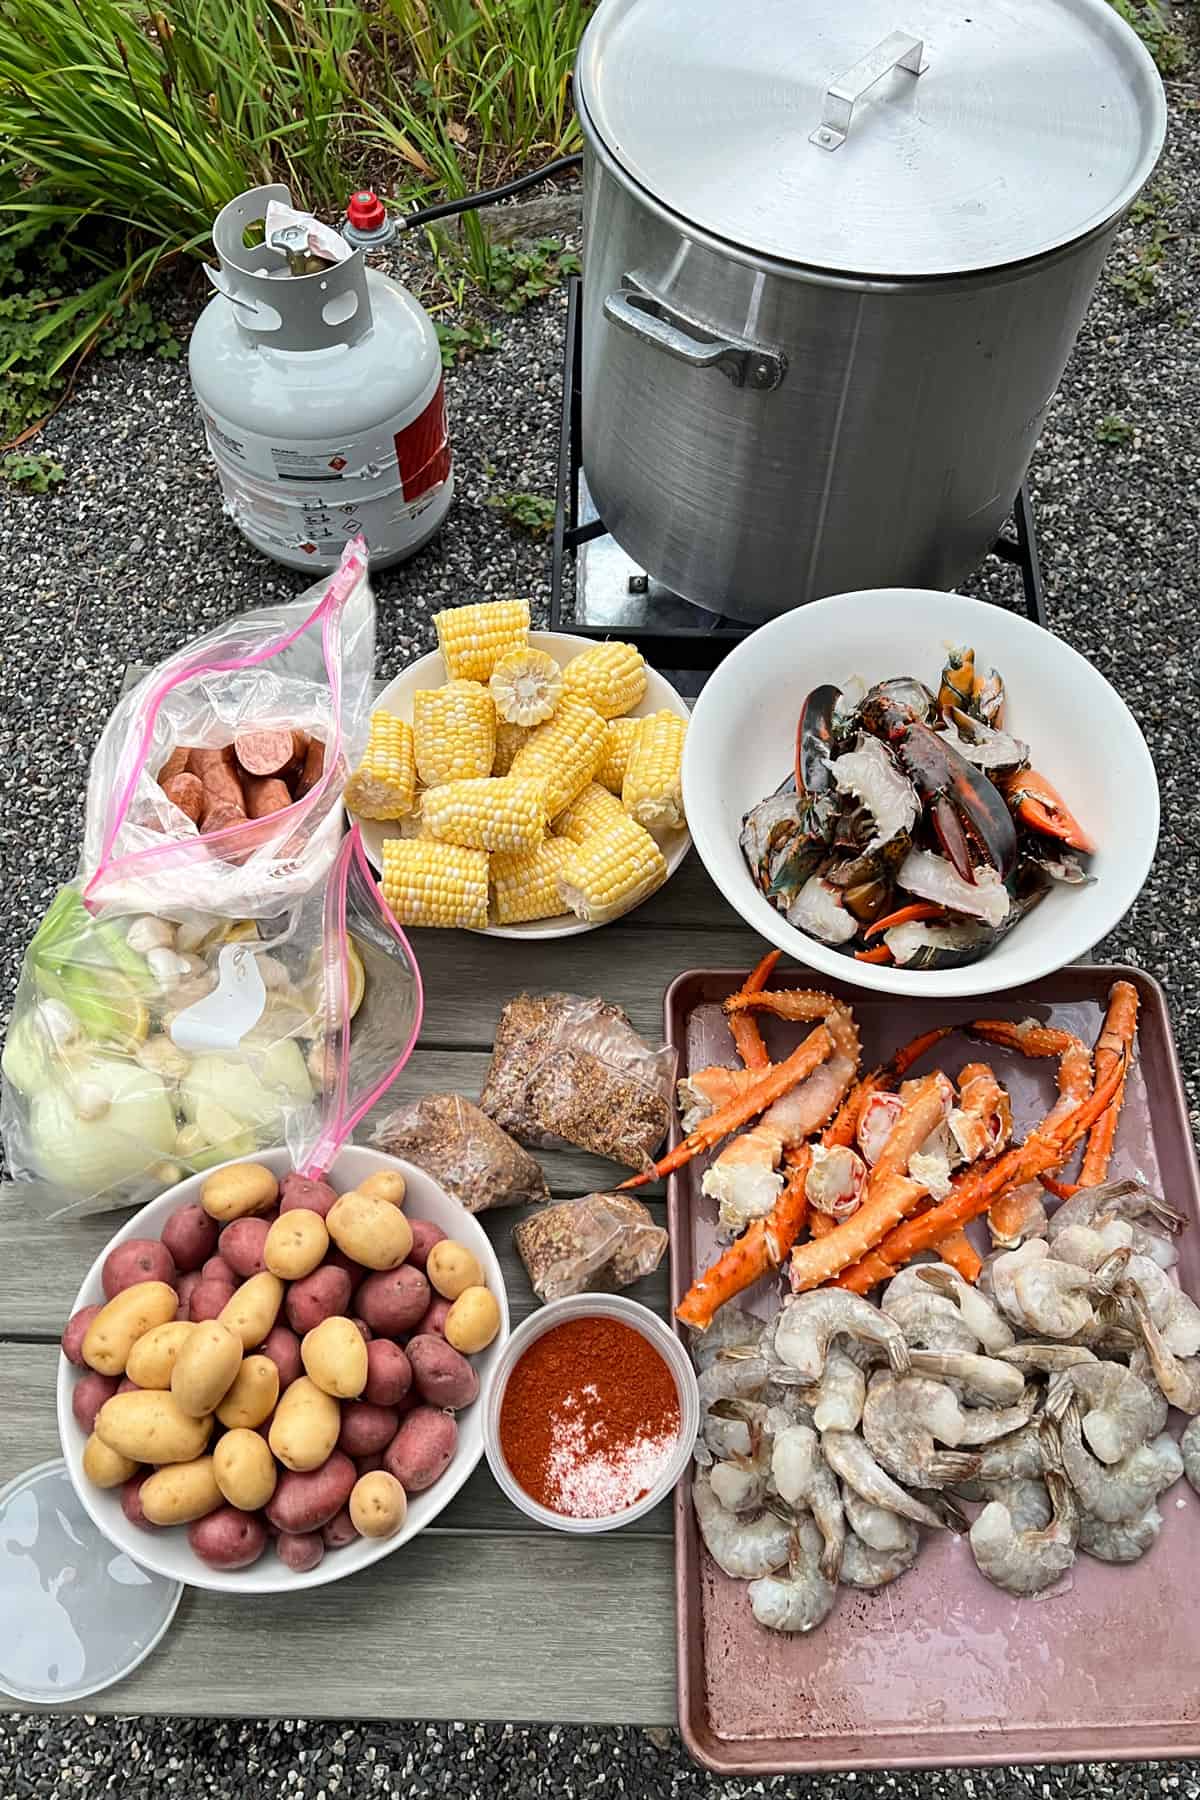 Seafood boil ingredients on an outdoor table near a big boiling pot with a propane tank. Bowl of lobster claws and tails, bowl of small potatoes, tray of shrimp and crab legs, bowl of corn, bag of sausages, bag of onions, celery and garlic, bags of spices and a container of salt and cayenne.